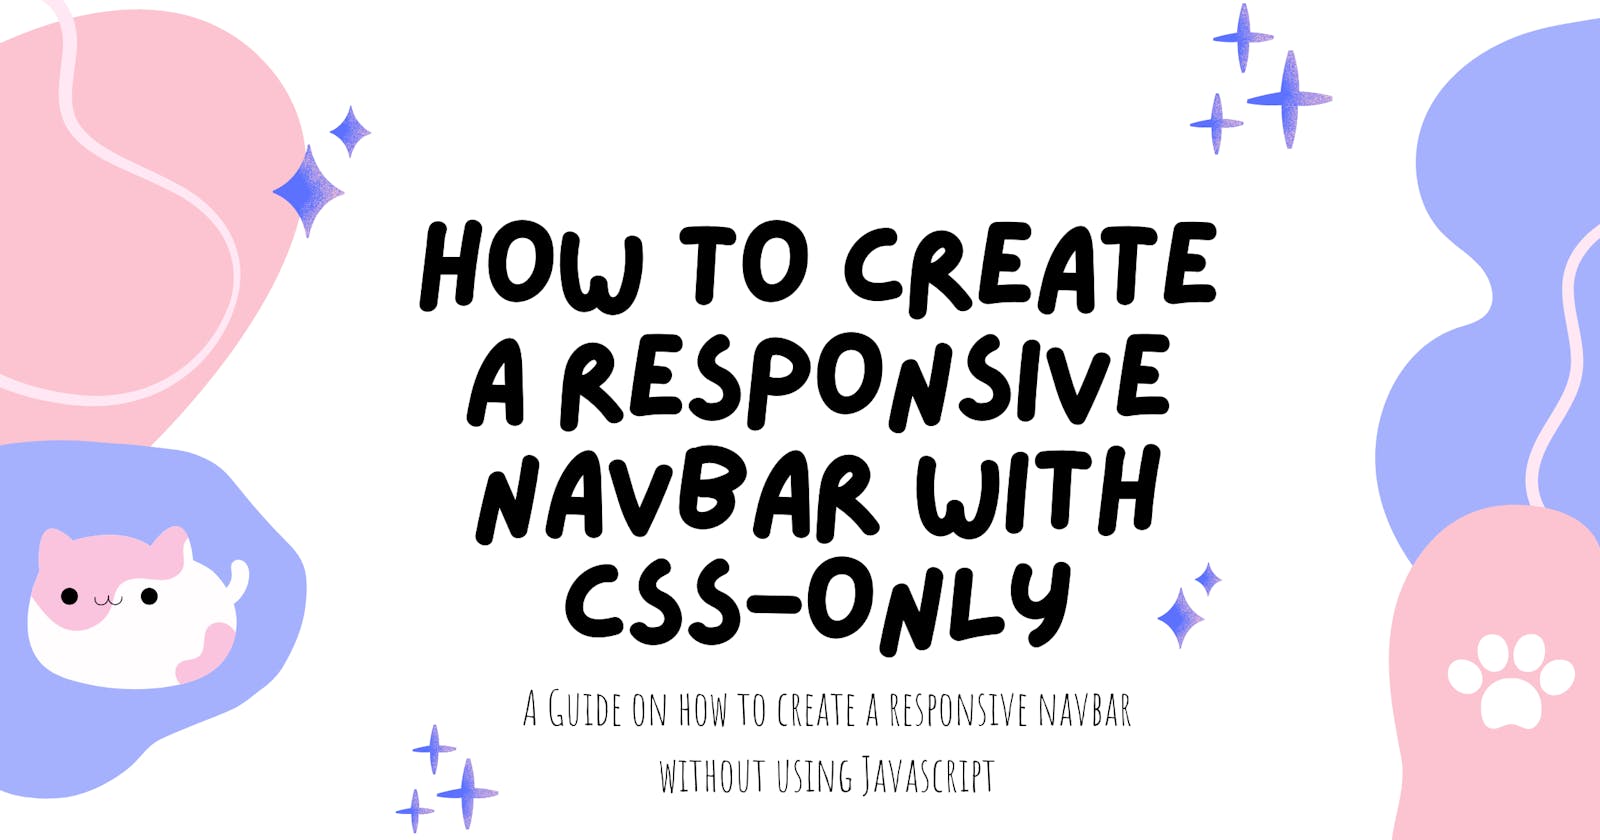 How to Make a Responsive NavBar with CSS-Only